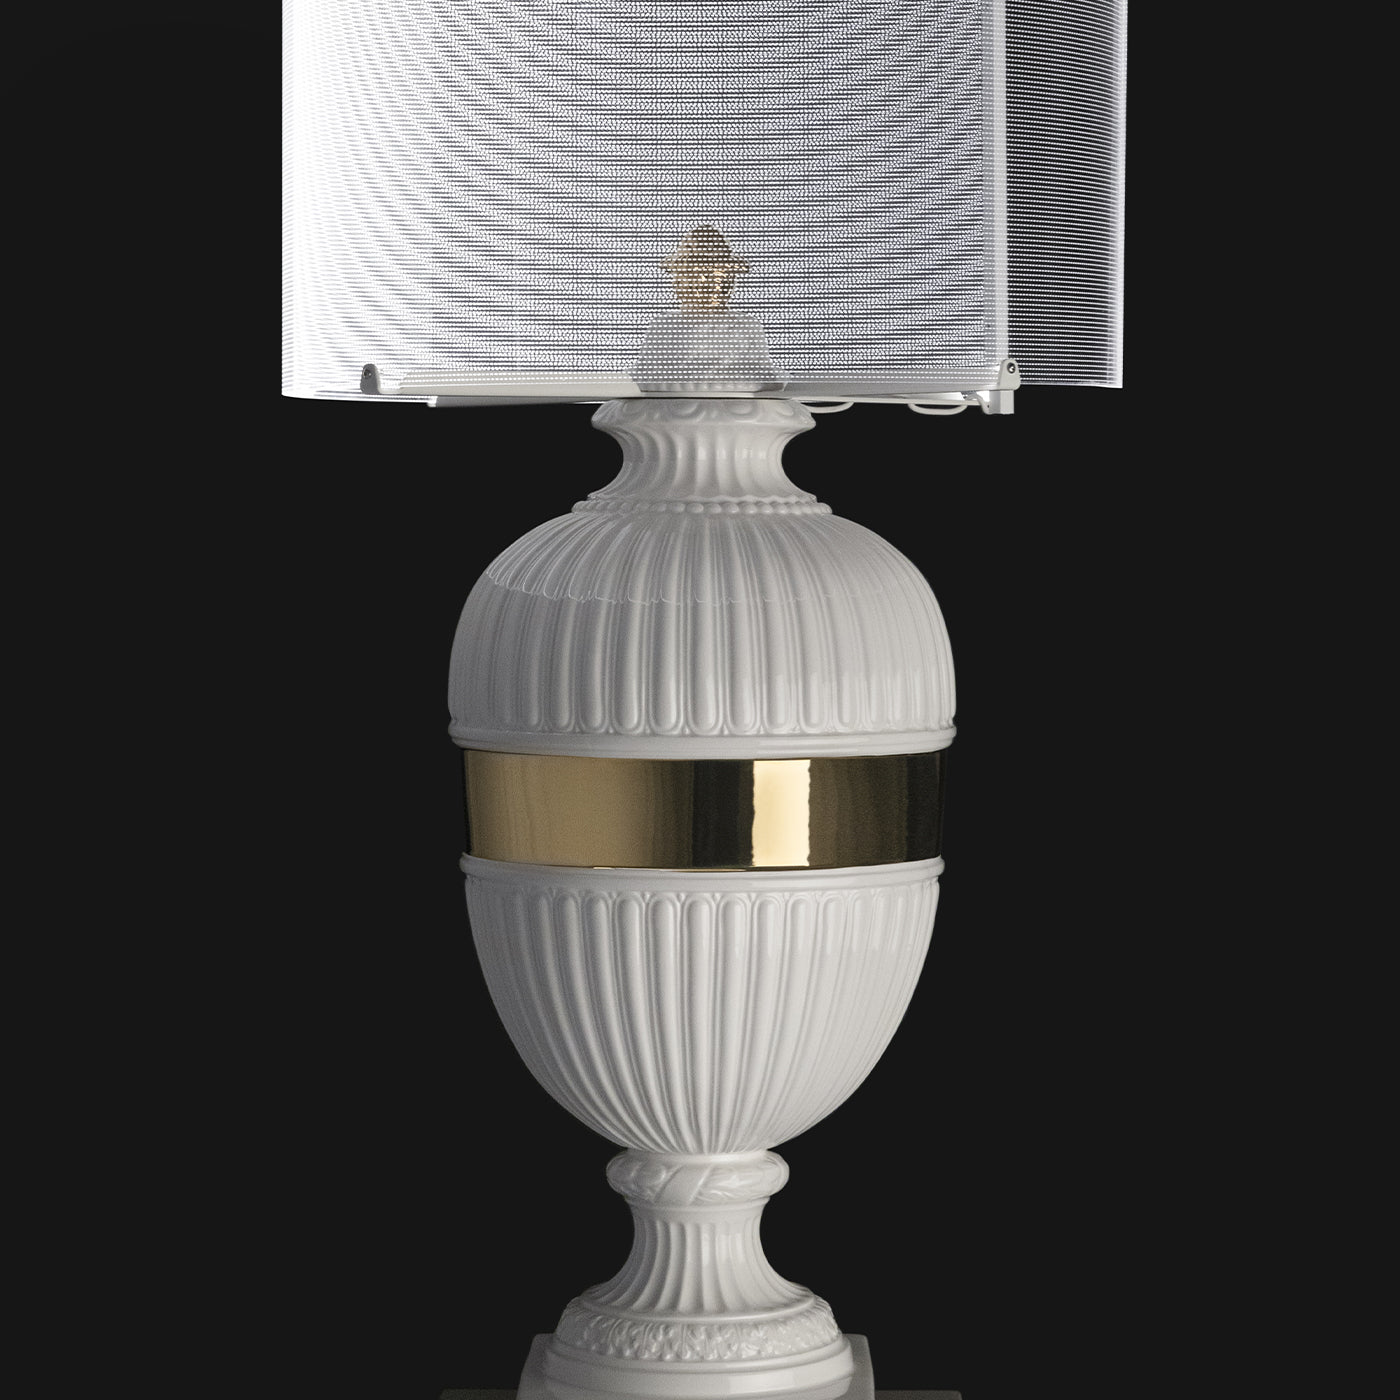 Psyche White and Gold Table Lamp - Alternative view 1